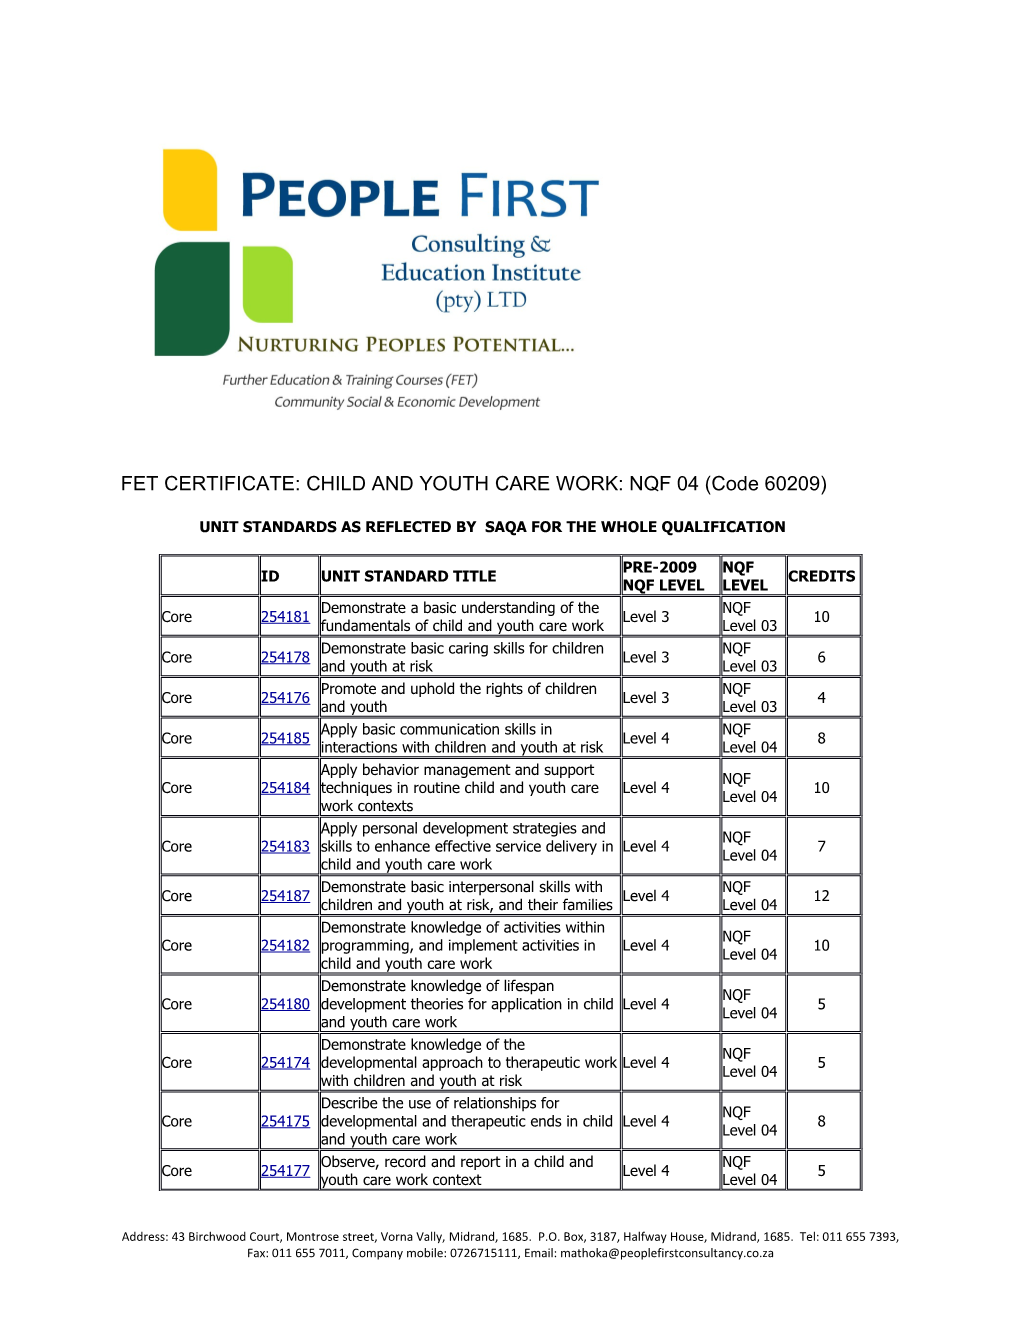 FET CERTIFICATE: CHILD and YOUTH CARE WORK: NQF 04 (Code 60209)